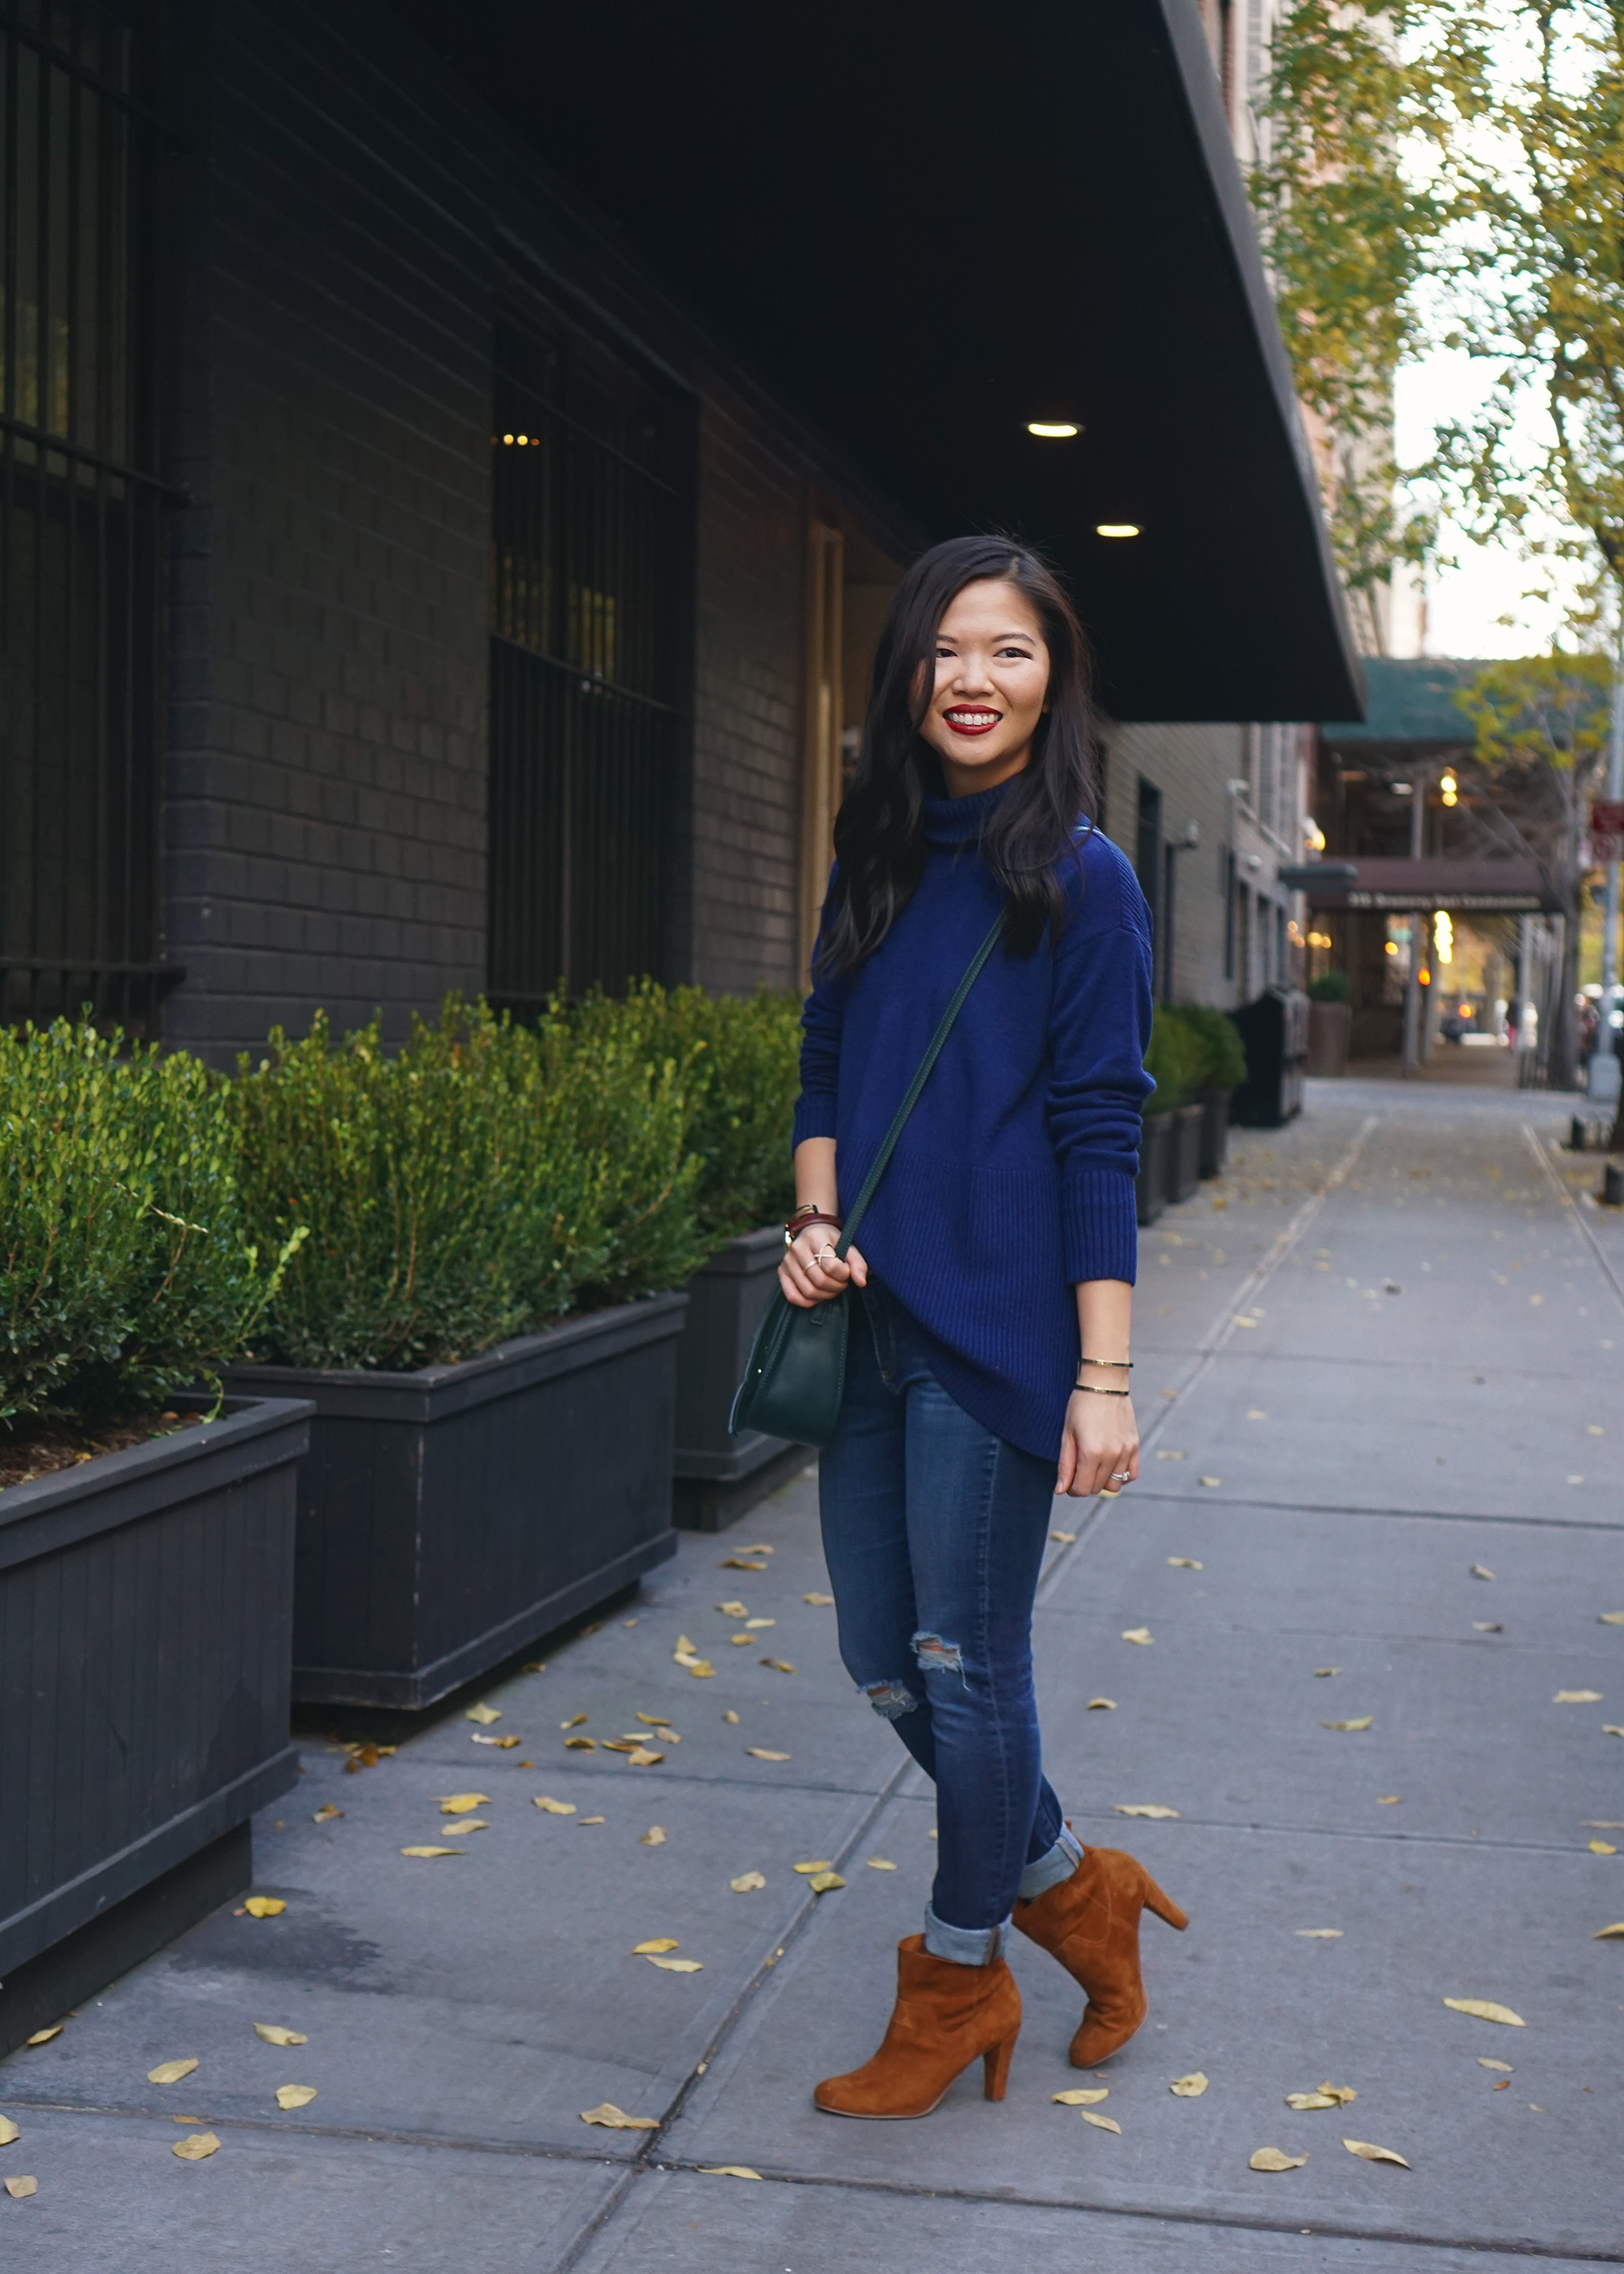 Casual Fall Outfit Idea: Navy Turtleneck & Ripped Jeans